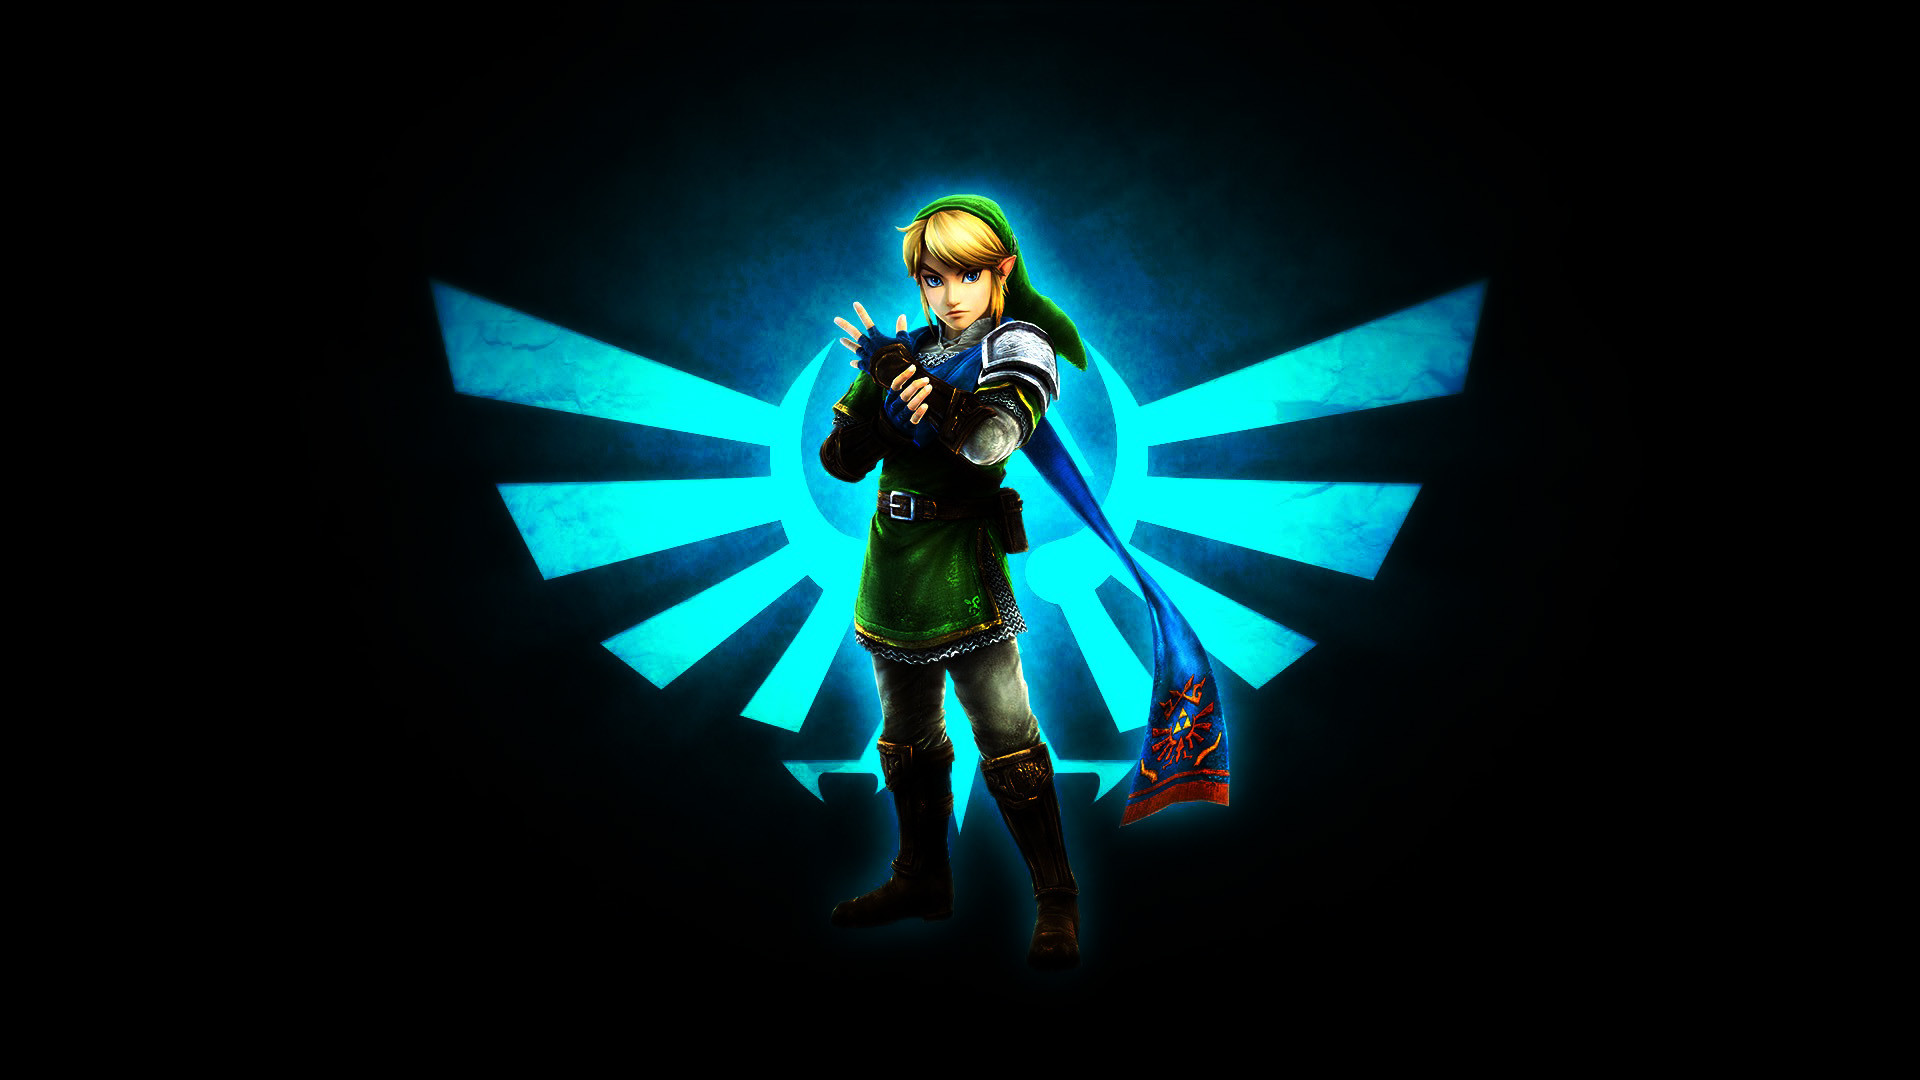 1920x1080 ... The Legend Of Zelda Link Wallpaper by TheWolfRomeo